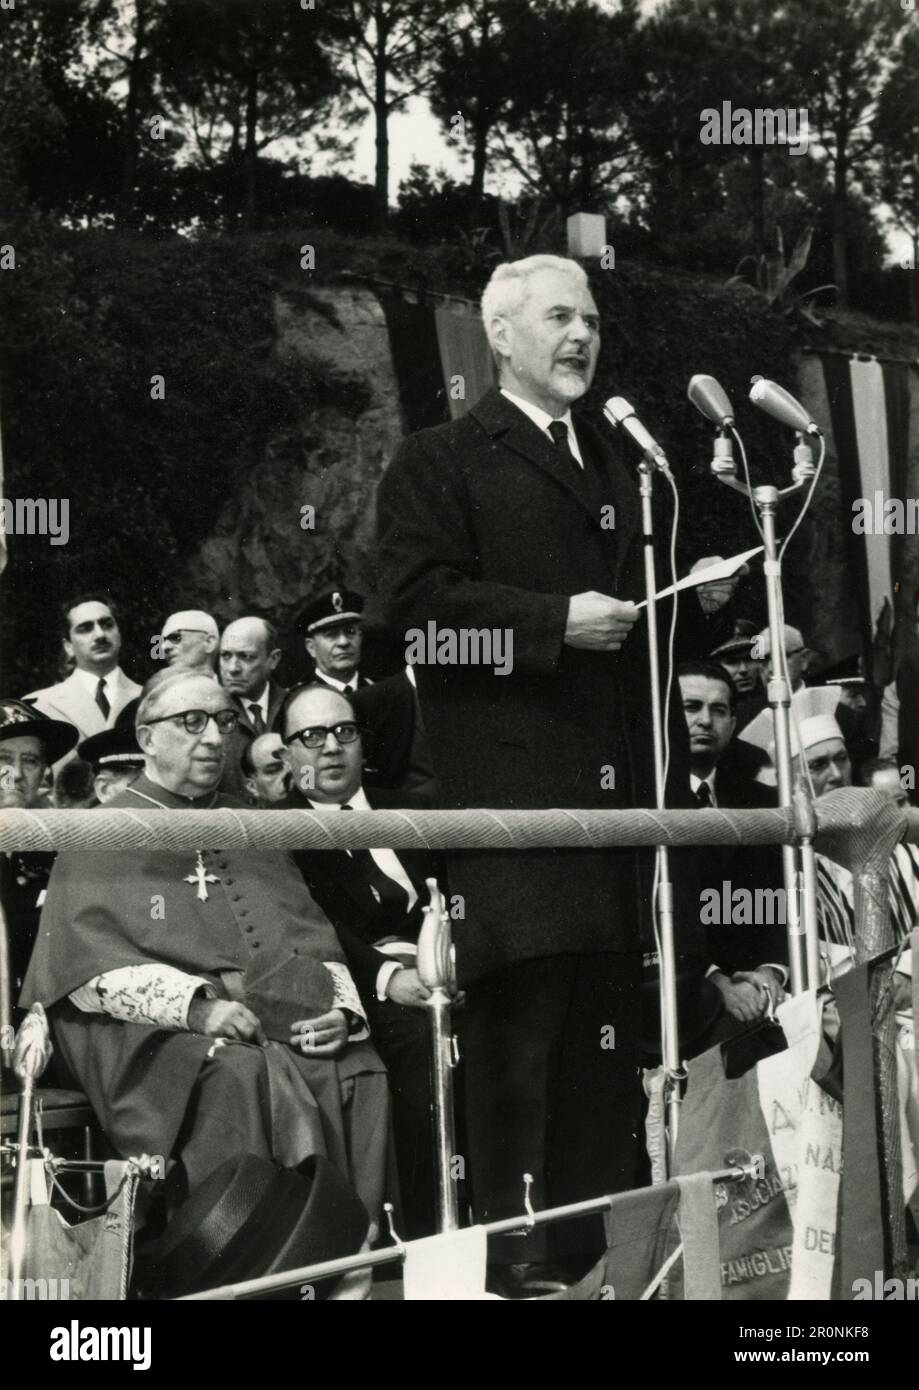 Italian politician delivering a speach at a commemoration, Italy 1965 Stock Photo